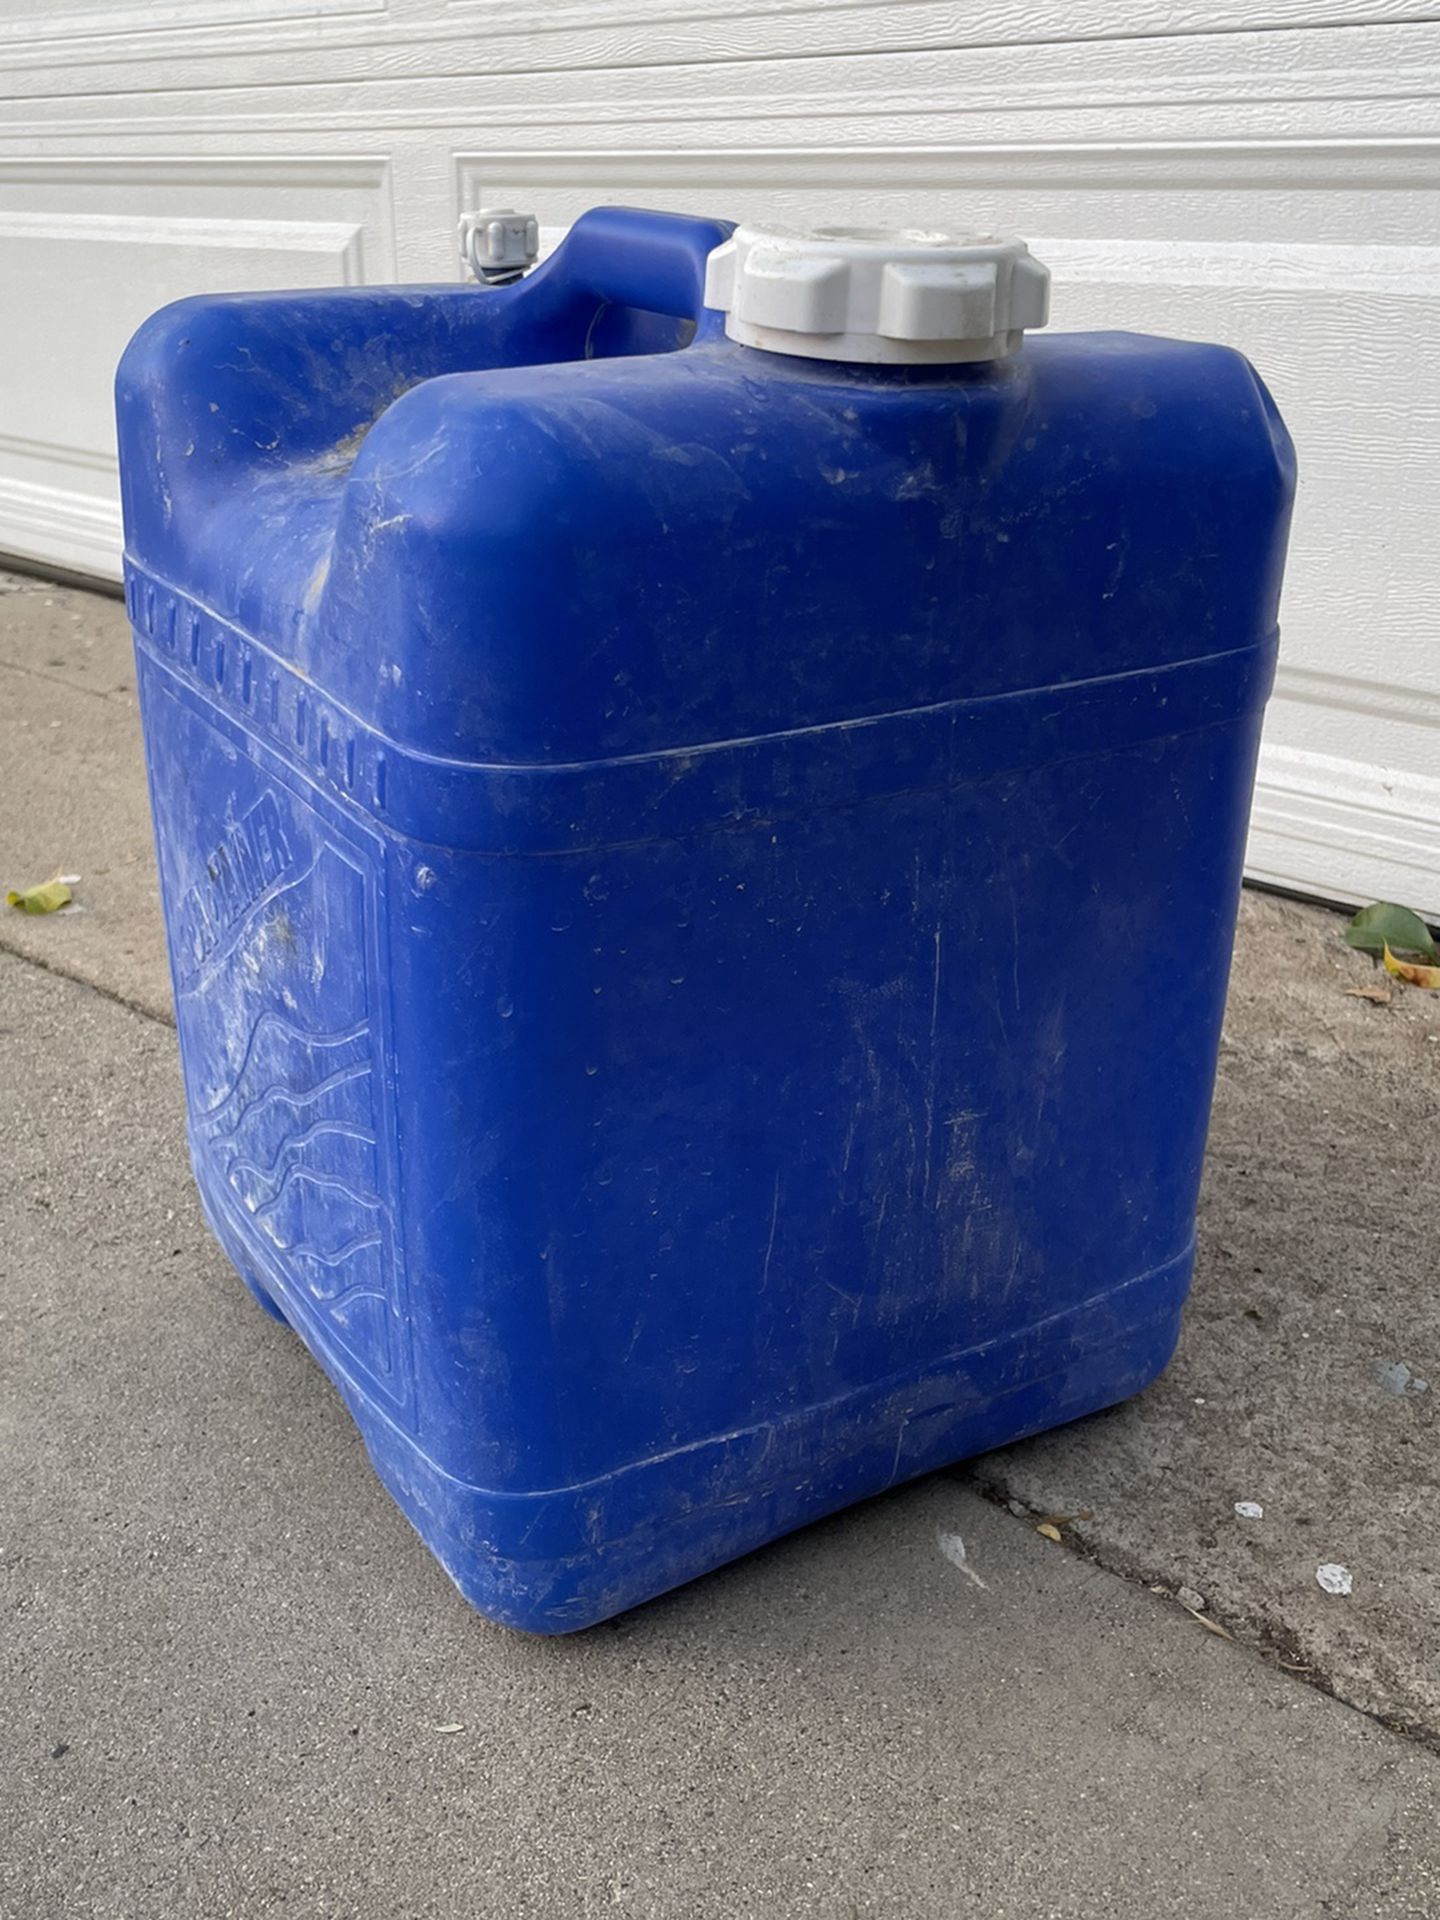 7 Gallon Water Jugs Containers